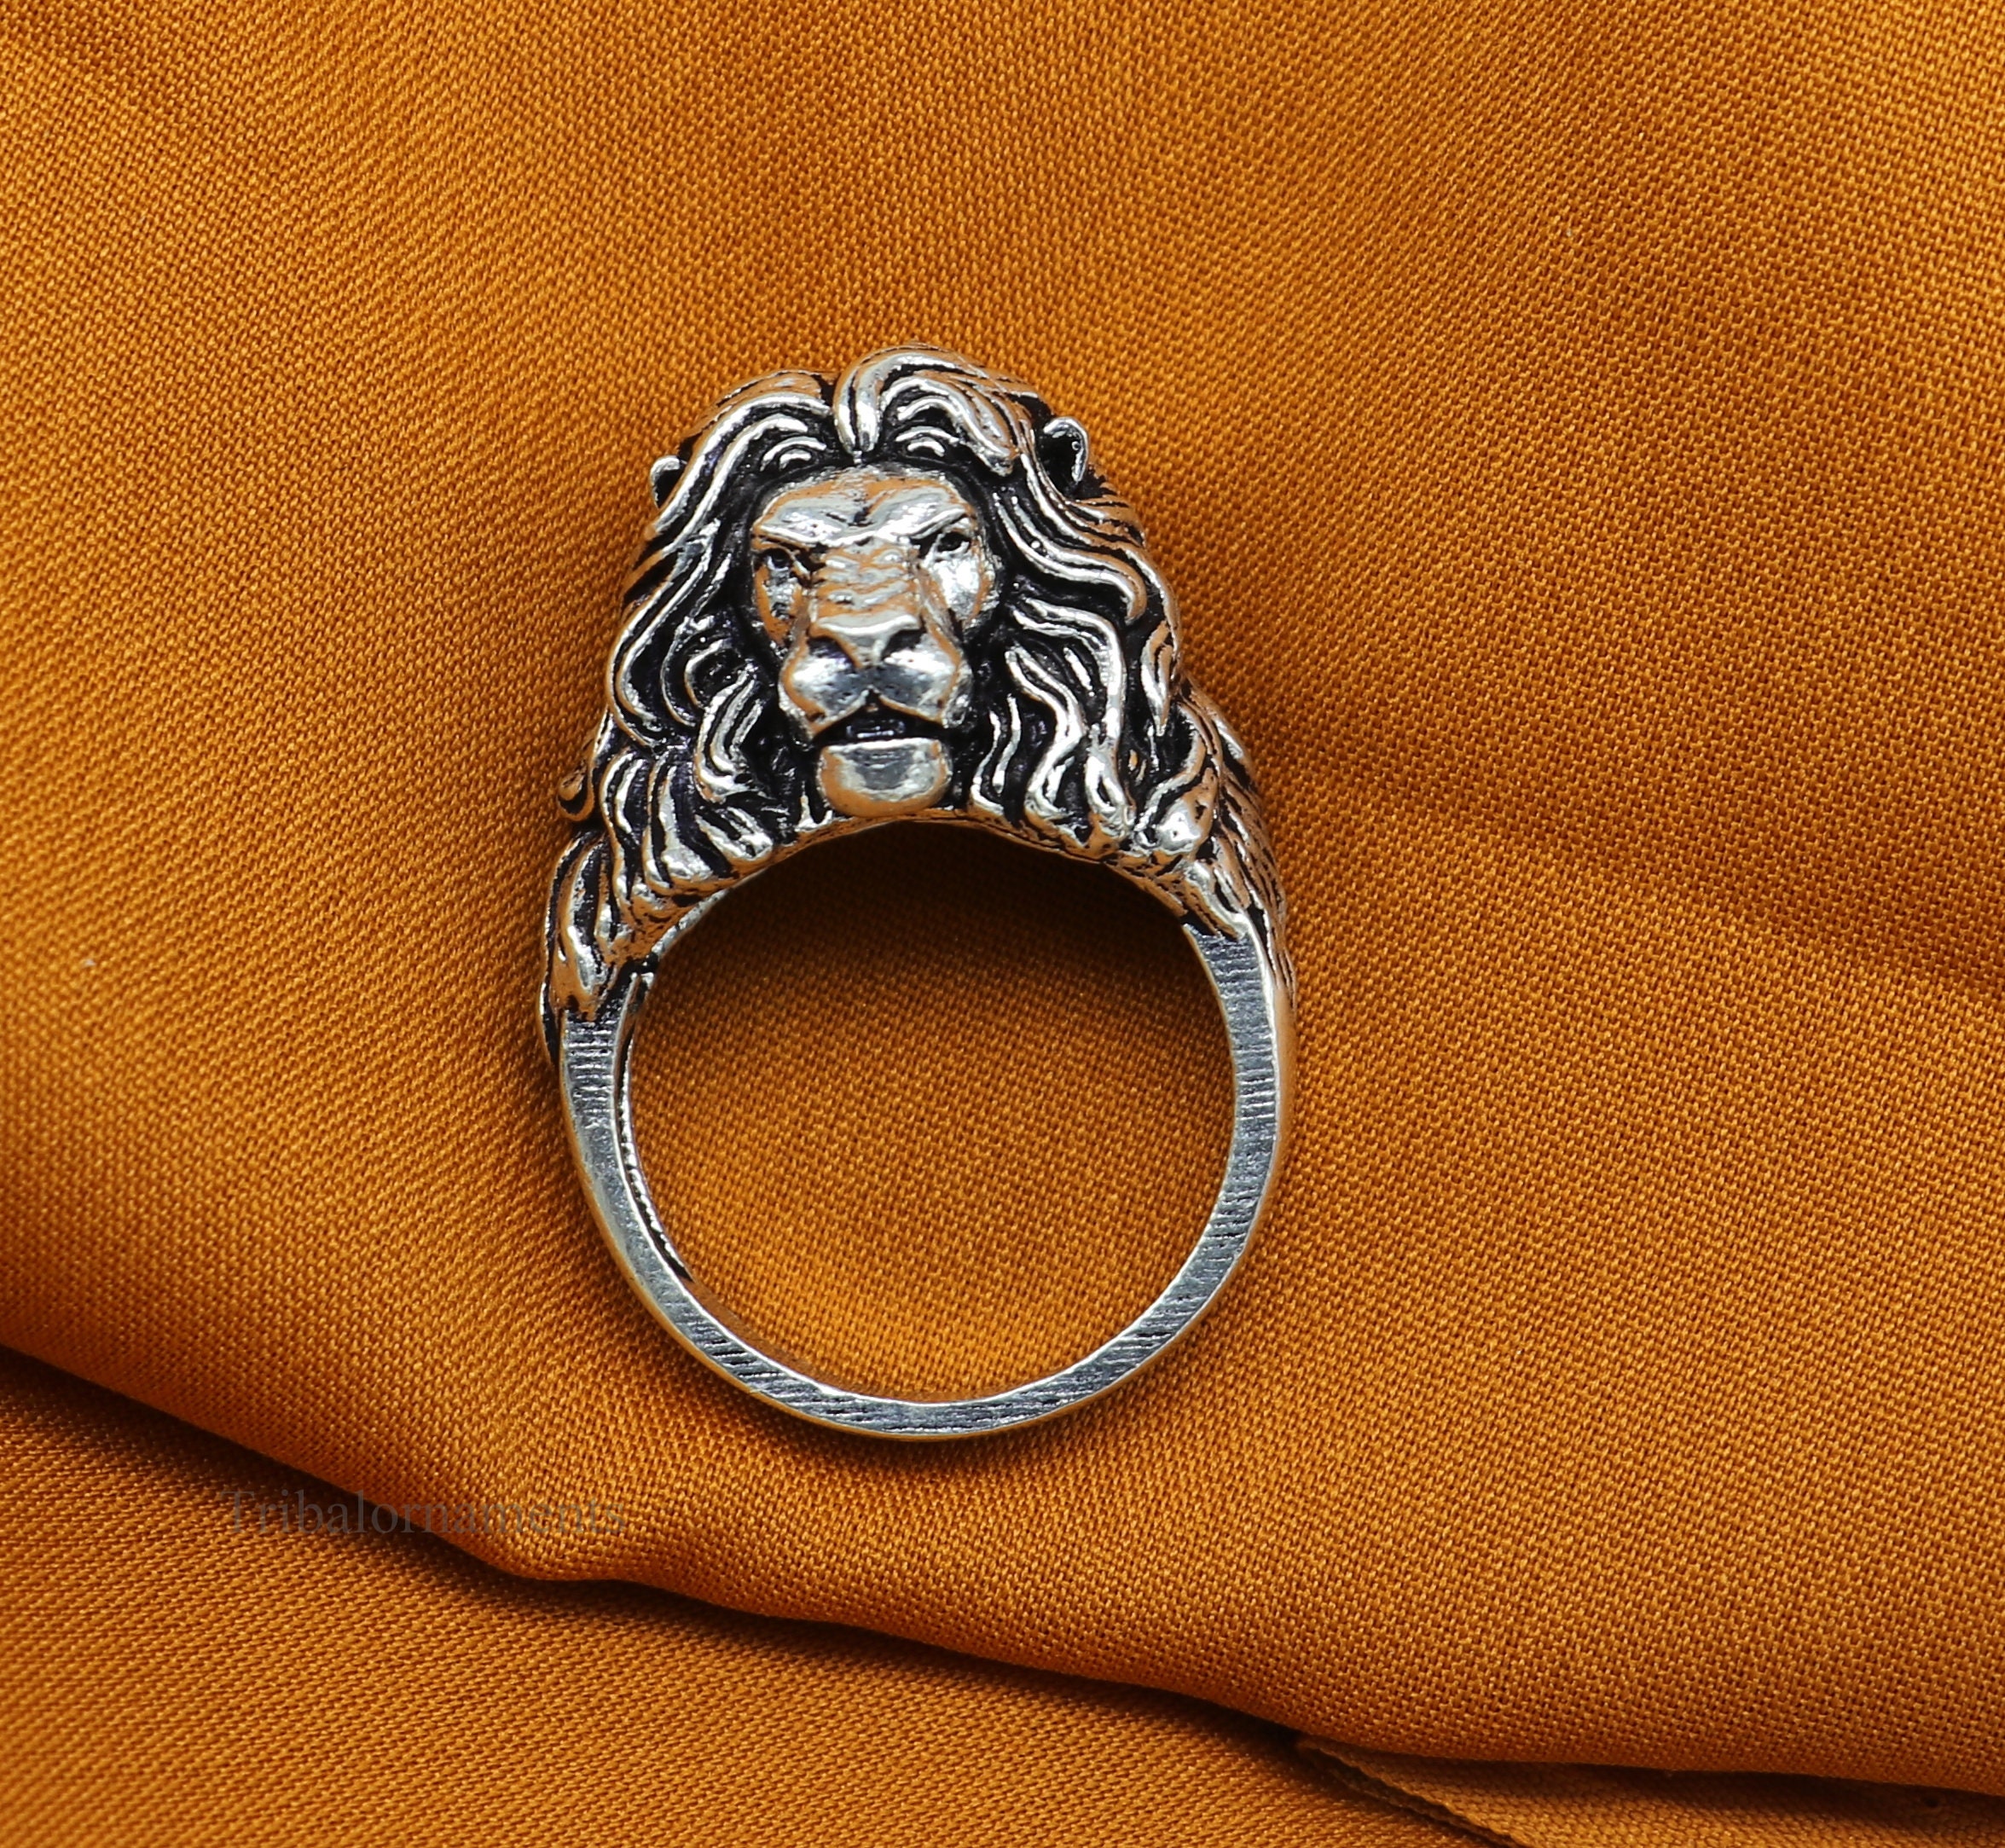 Lion Head Ring Sterling Silver Ring,animal Ring,handmade Oxdized Ring,lion  Ring Silver,free Express Shipping - Etsy